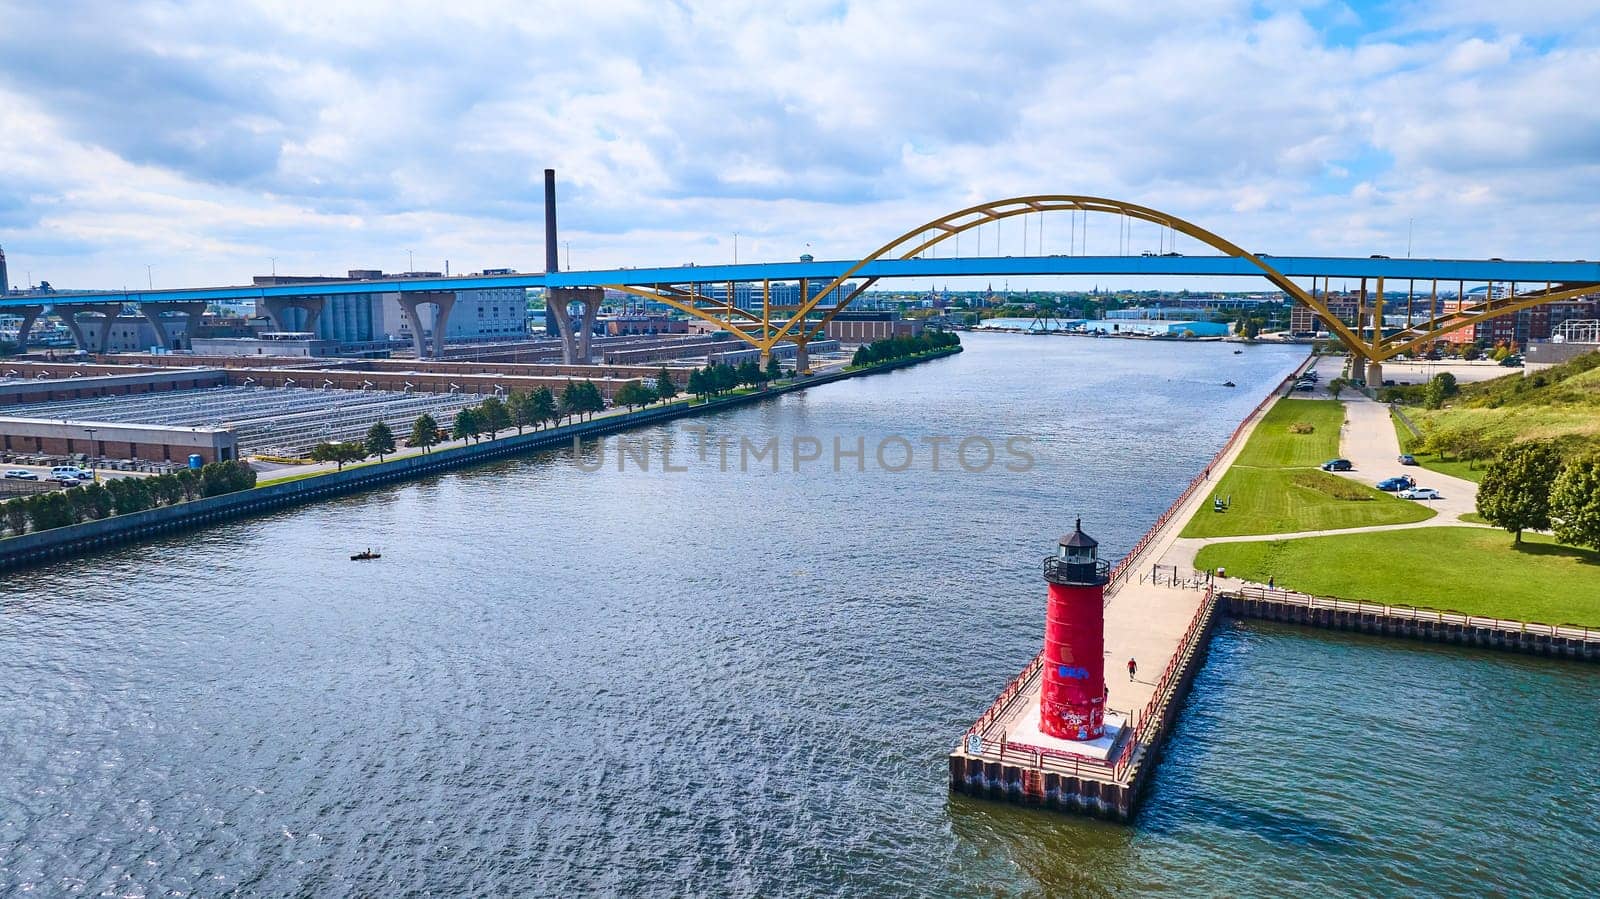 Vibrant aerial view of Milwaukee's waterfront with the iconic red Pierhead Lighthouse, golden Daniel W. Hoan Memorial Bridge, and shimmering Lake Michigan